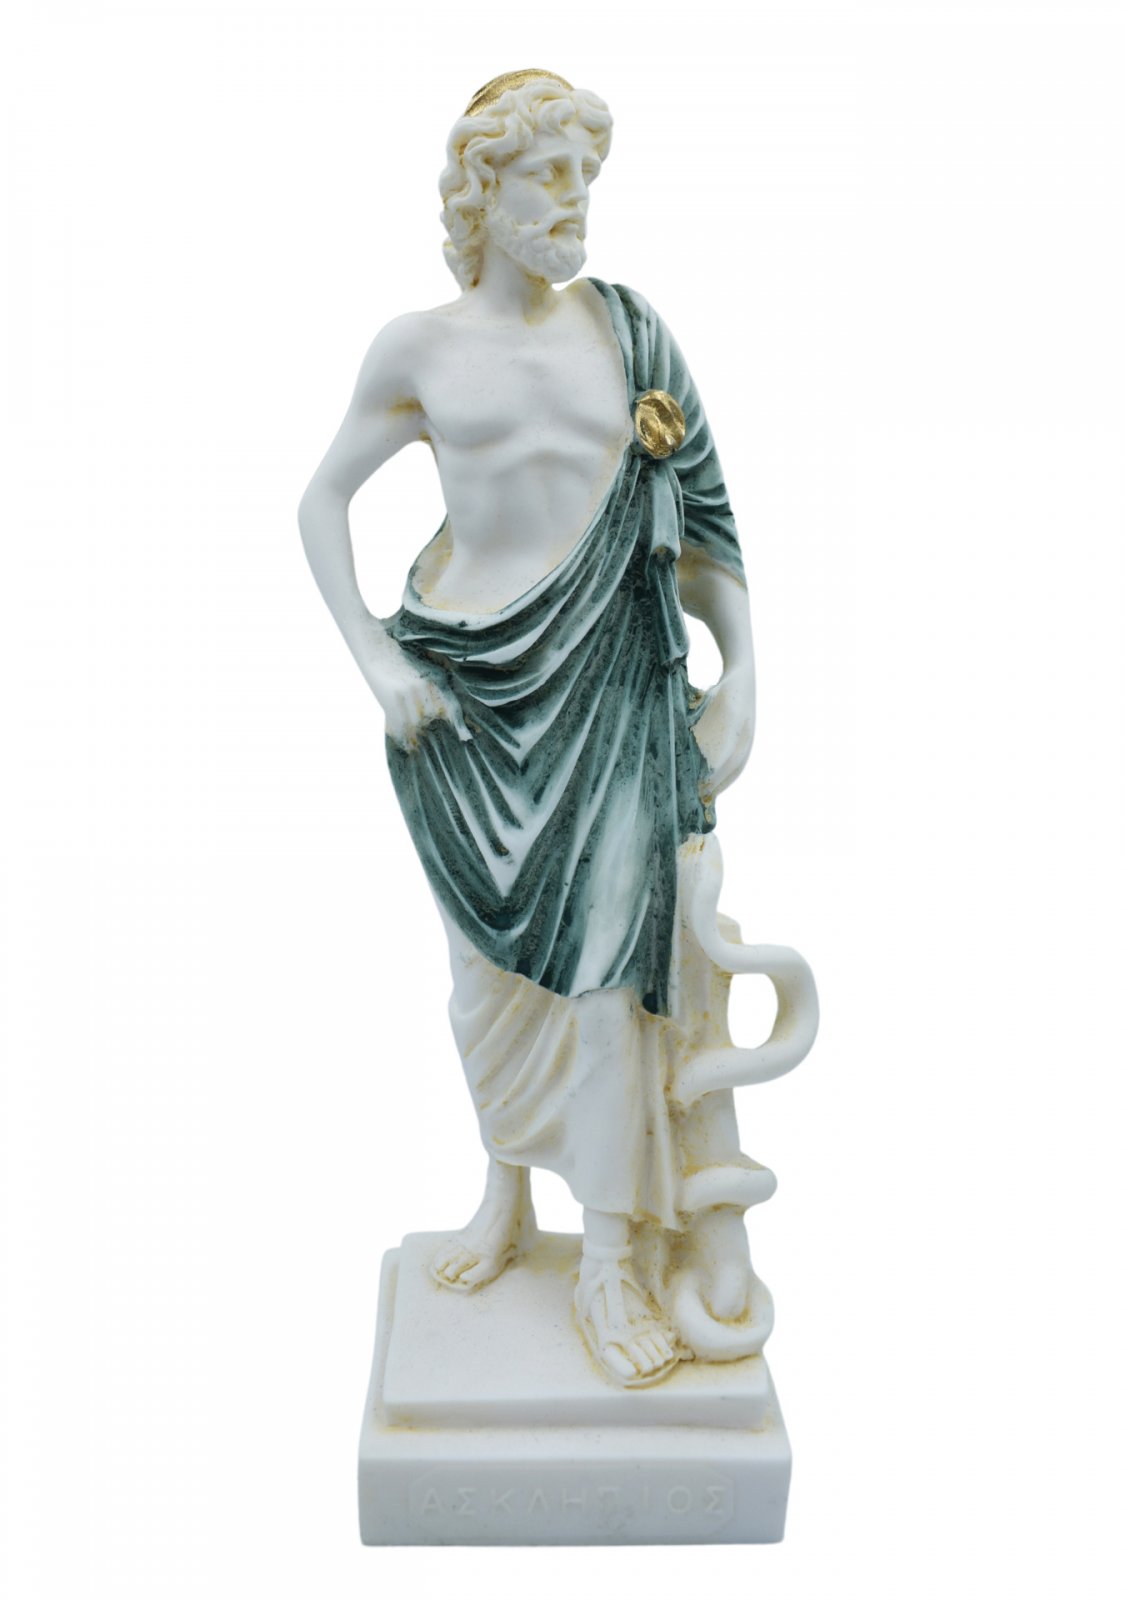  Ascelpius (Asklepios), the greek god of medicine, alabaster statue with green color and patina